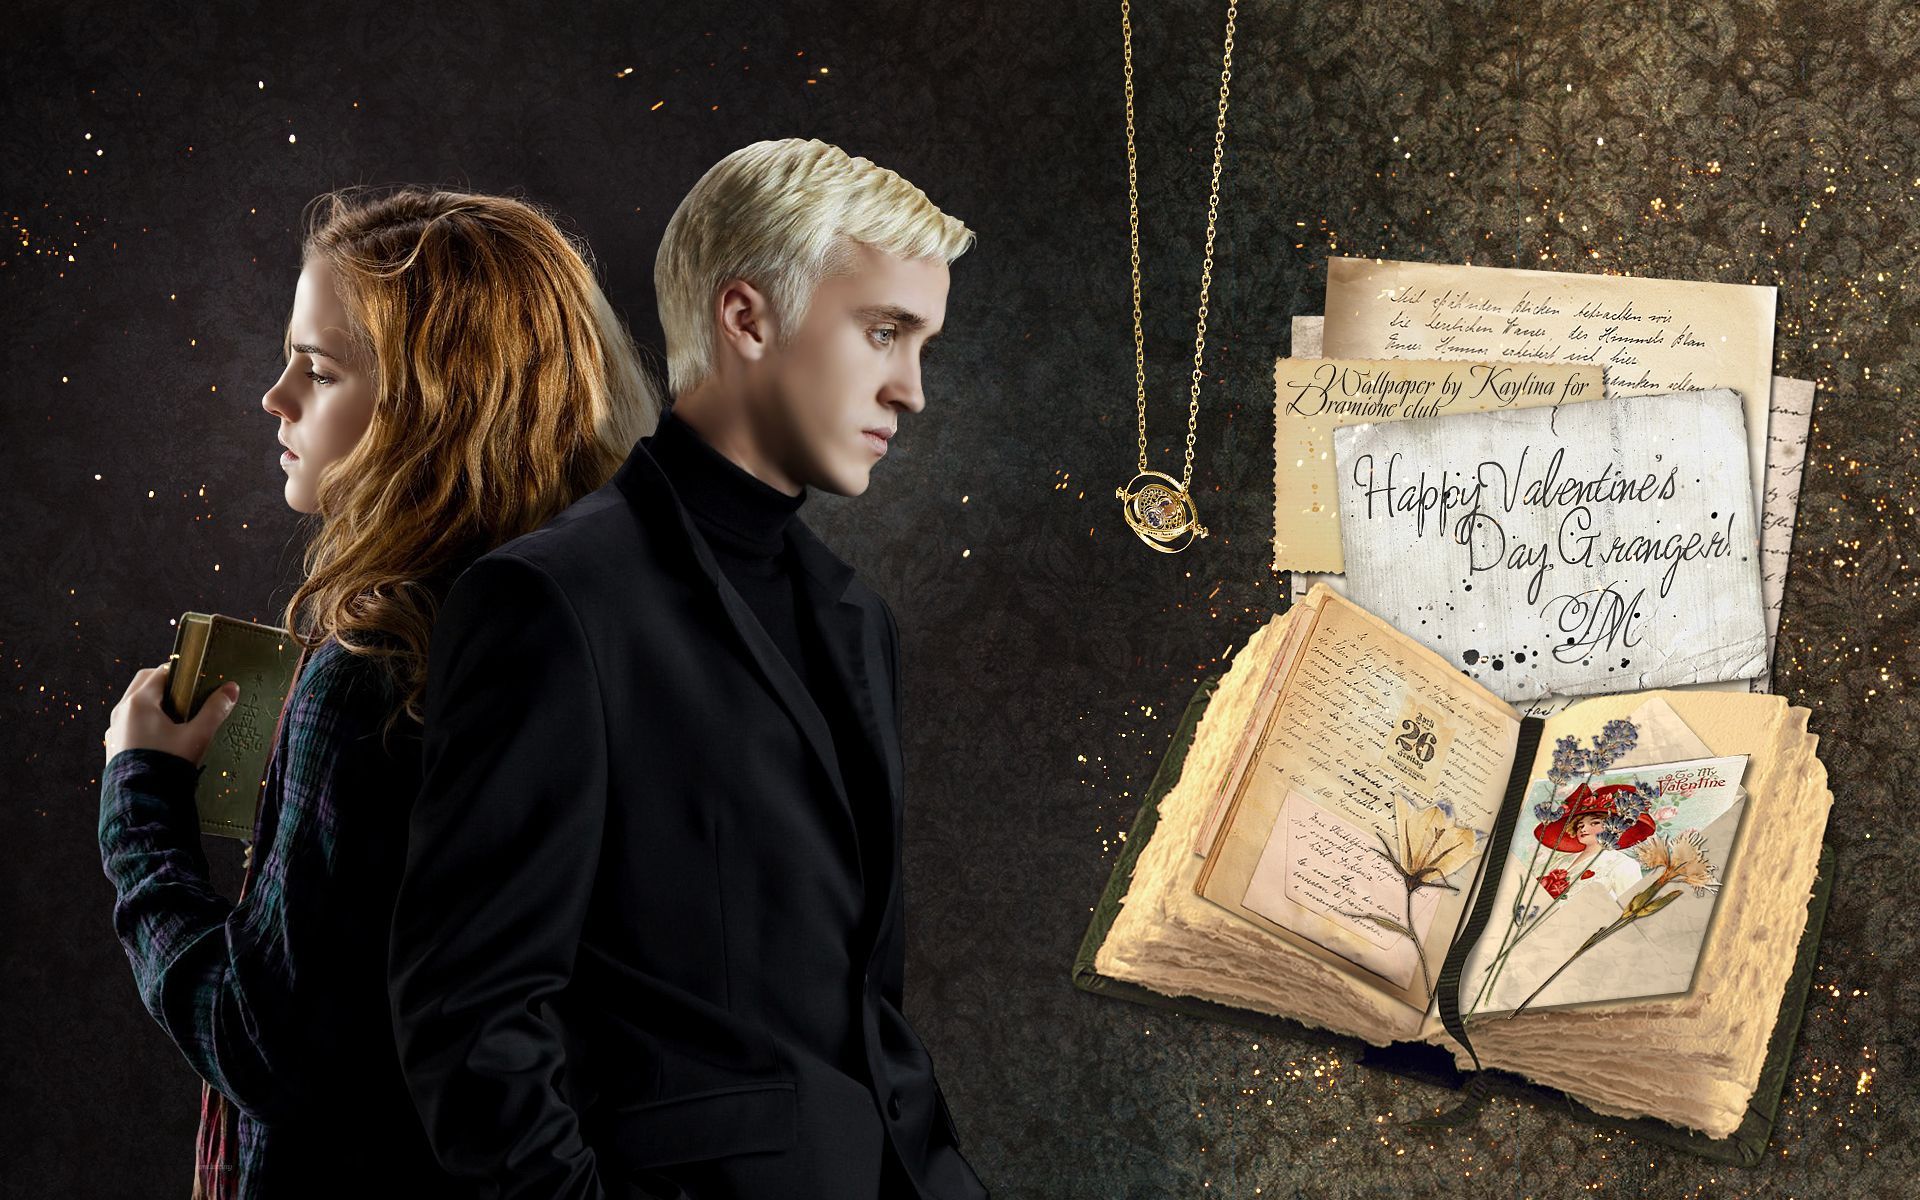 Dramione wallpapers by Kaylina on deviantART.